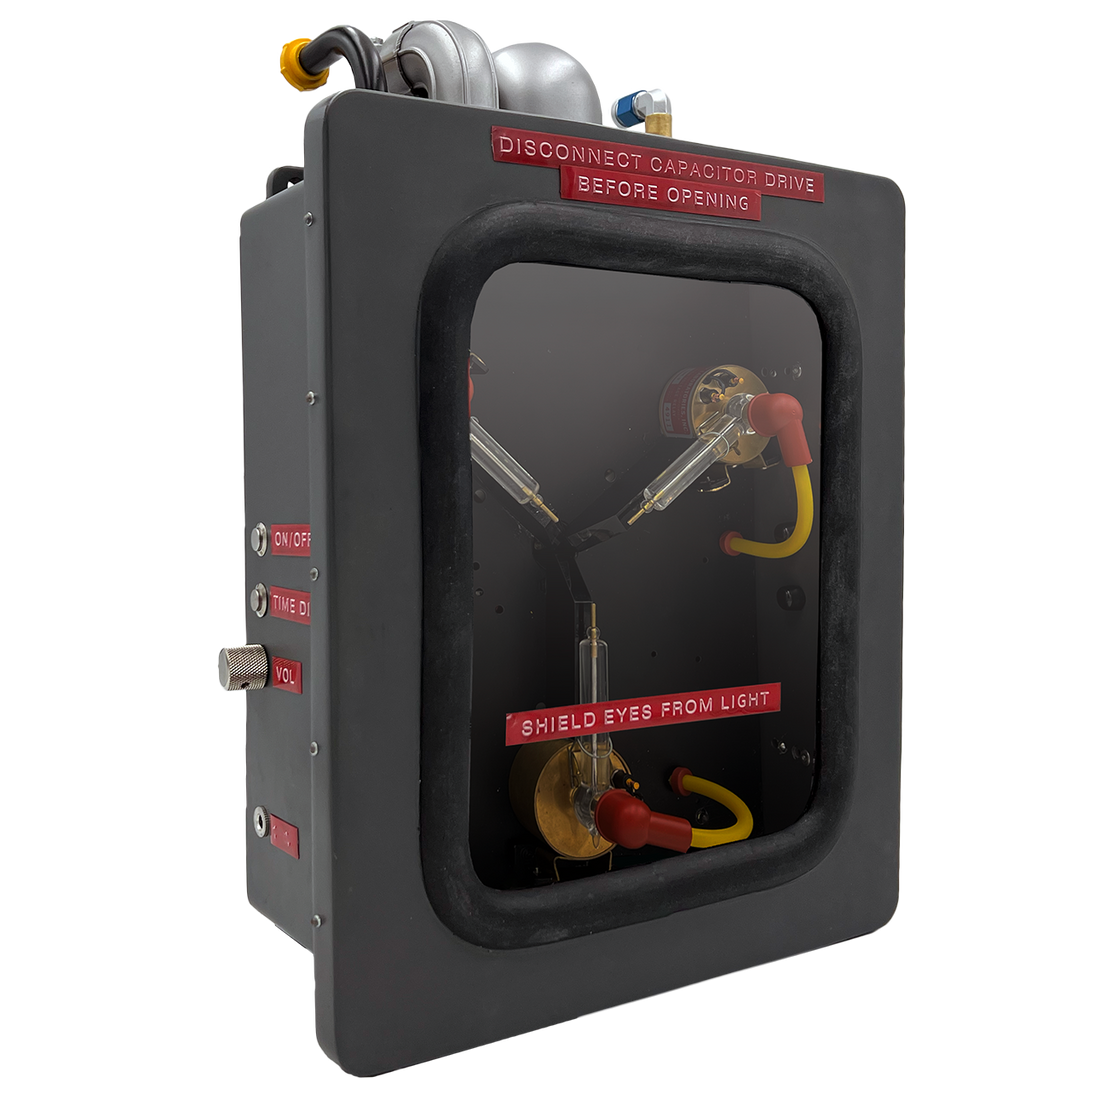 Back To The Future │ Flux Capacitor Limited Edition Prop Replica